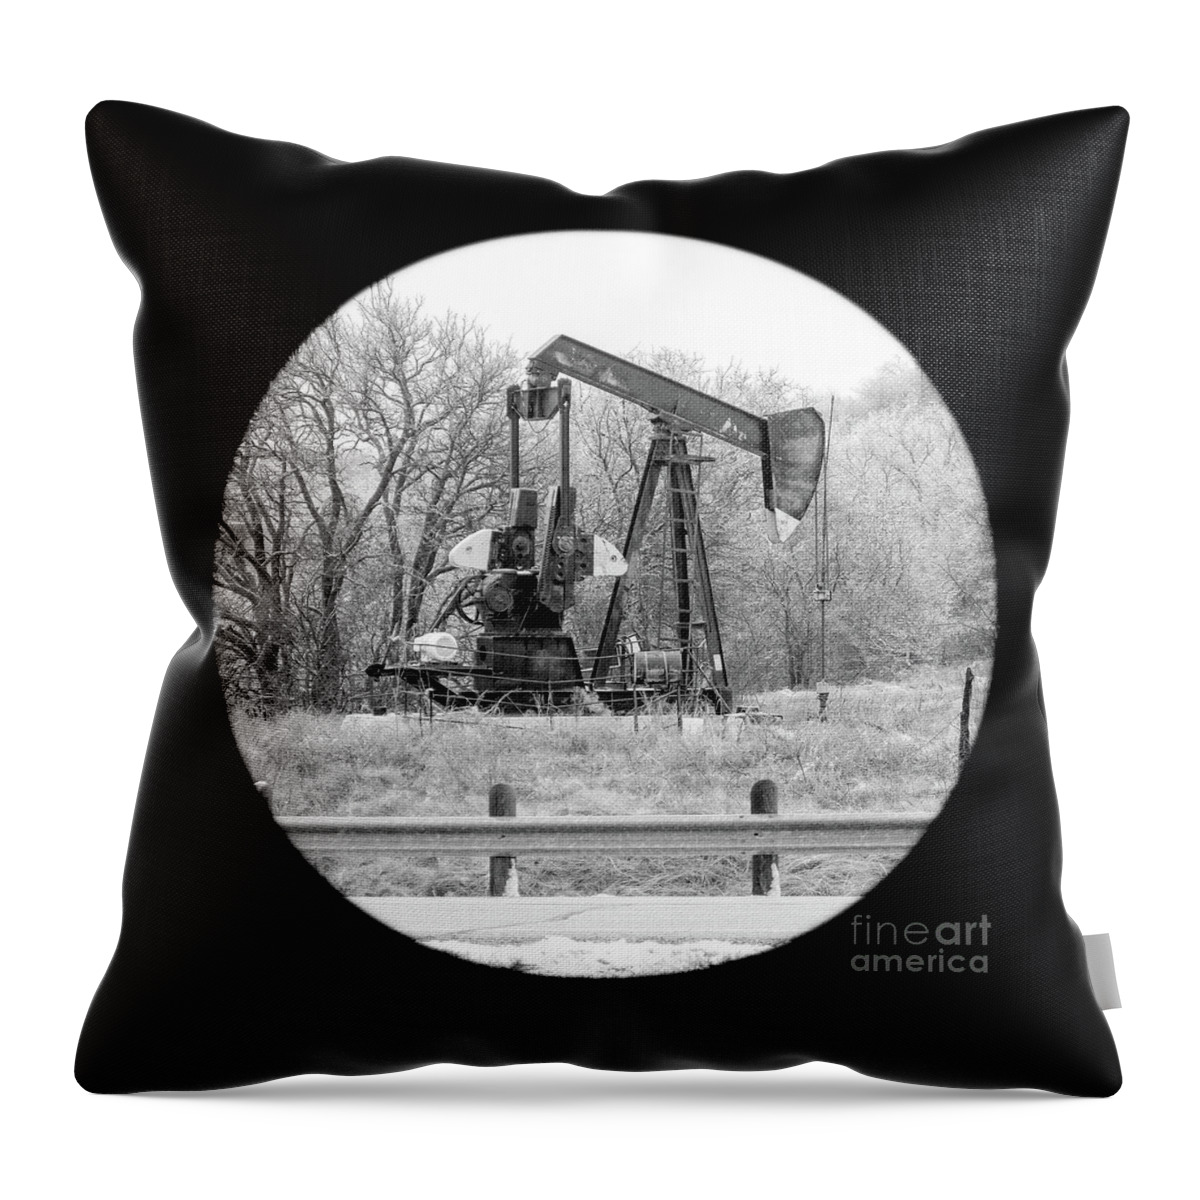 Wintry Pumpjack Throw Pillow featuring the photograph Wintry Pumpjack by Imagery by Charly